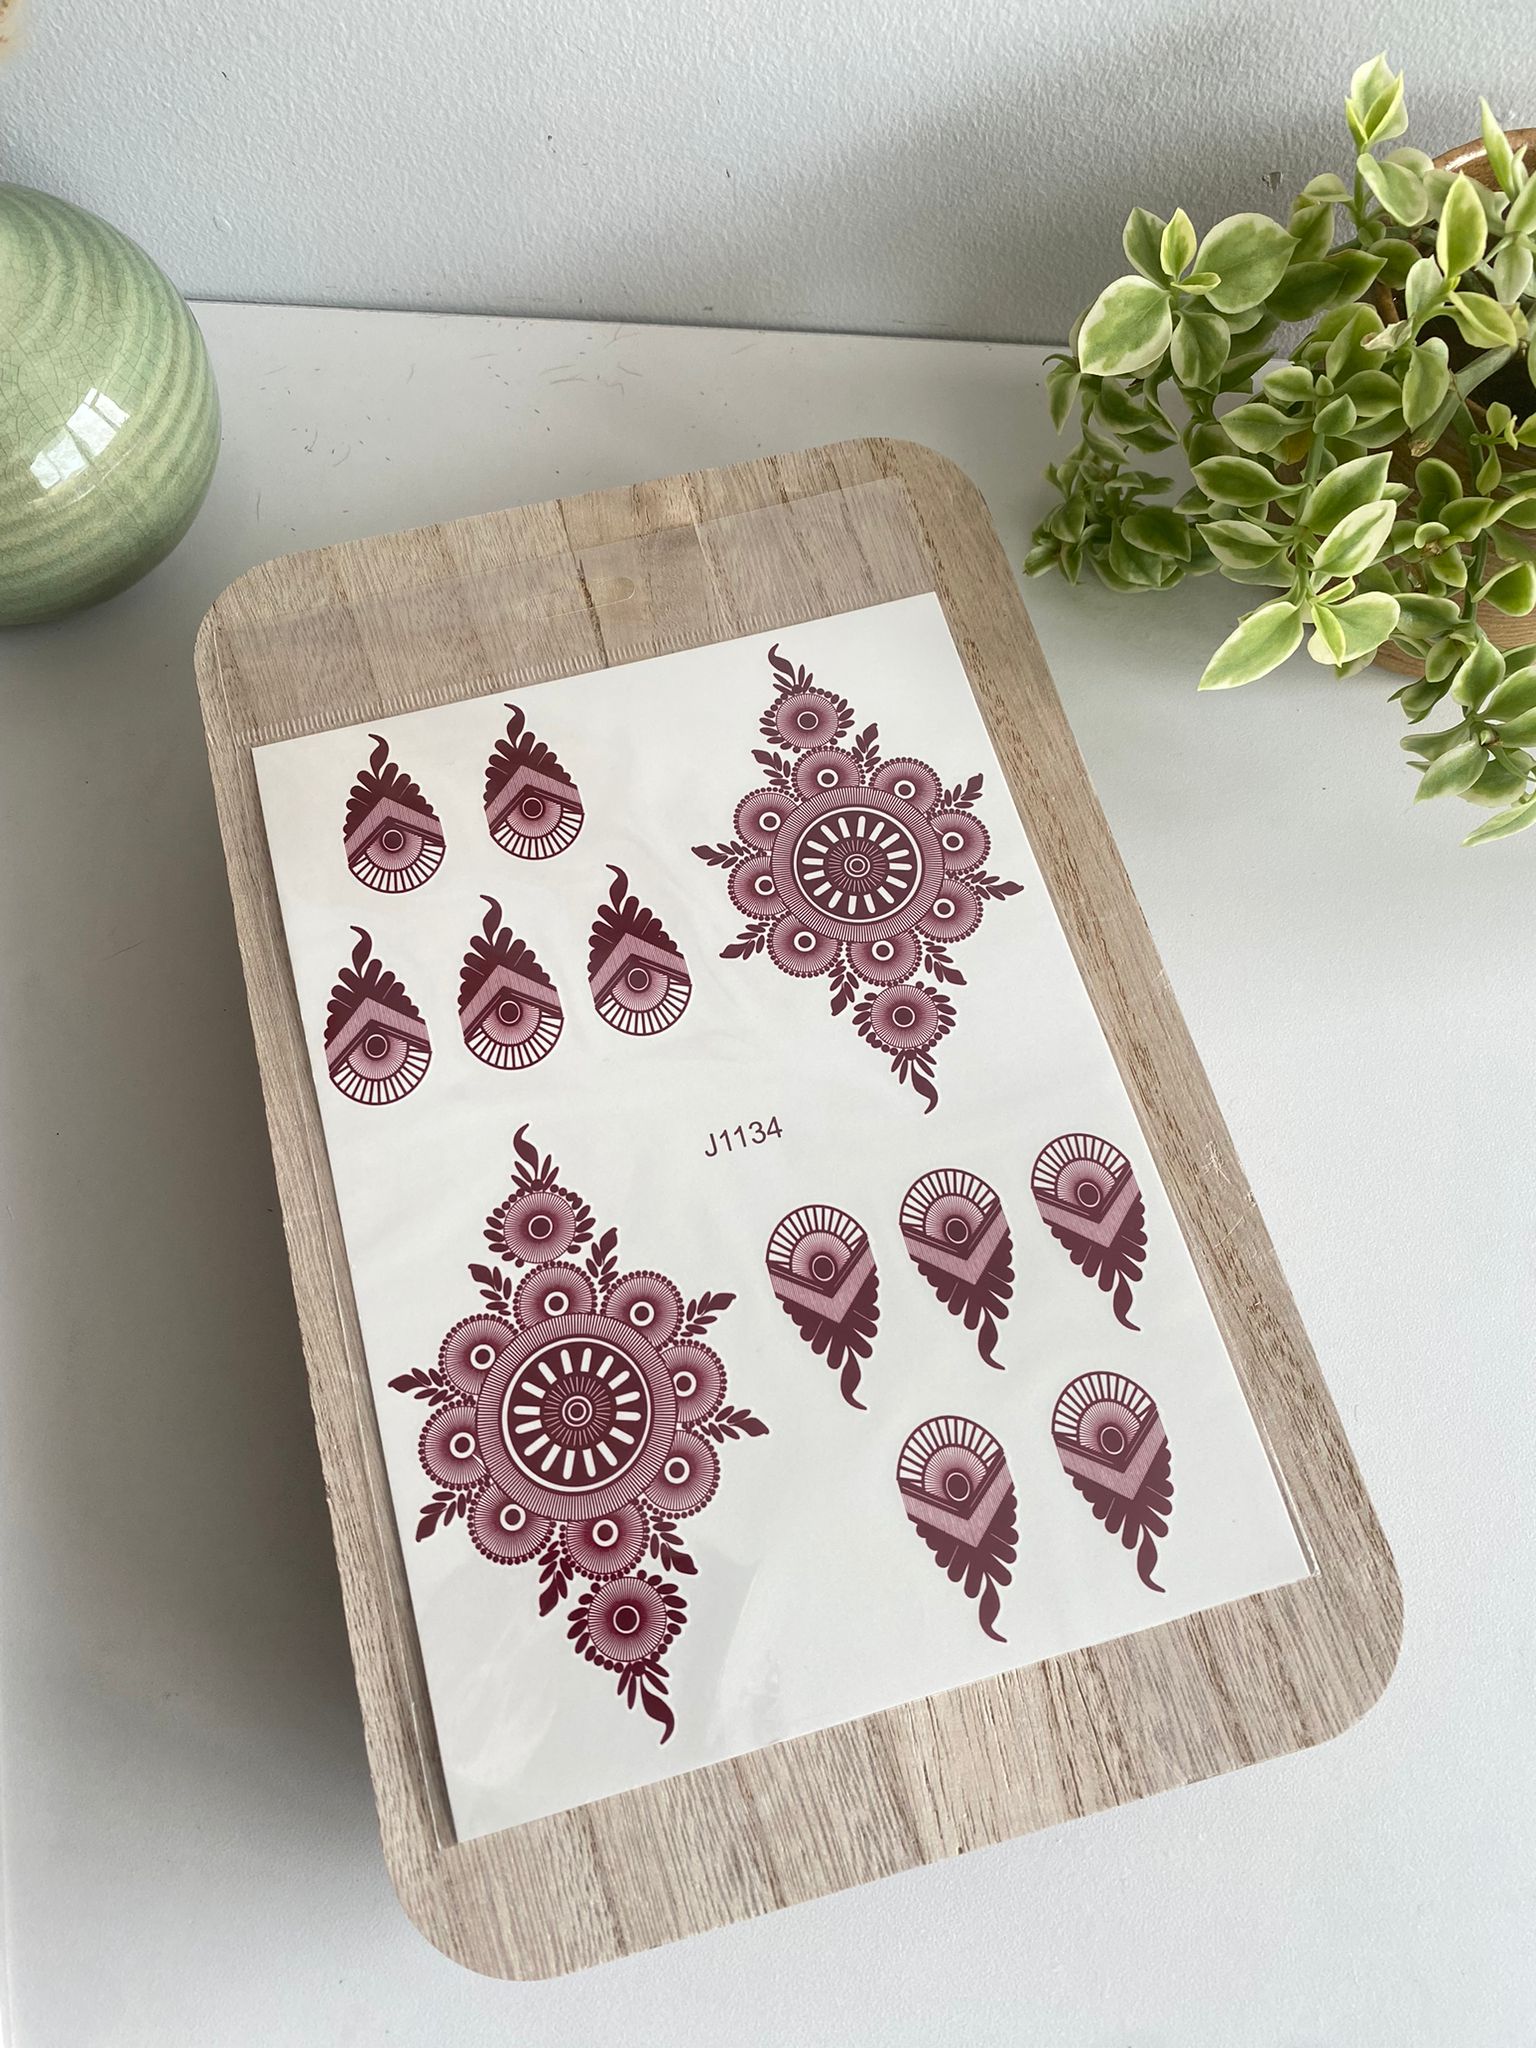 Festive Essentials - Beautiful and Easy to put on. Waterproof henna includes design for 2 hands. Each design is One sheet.